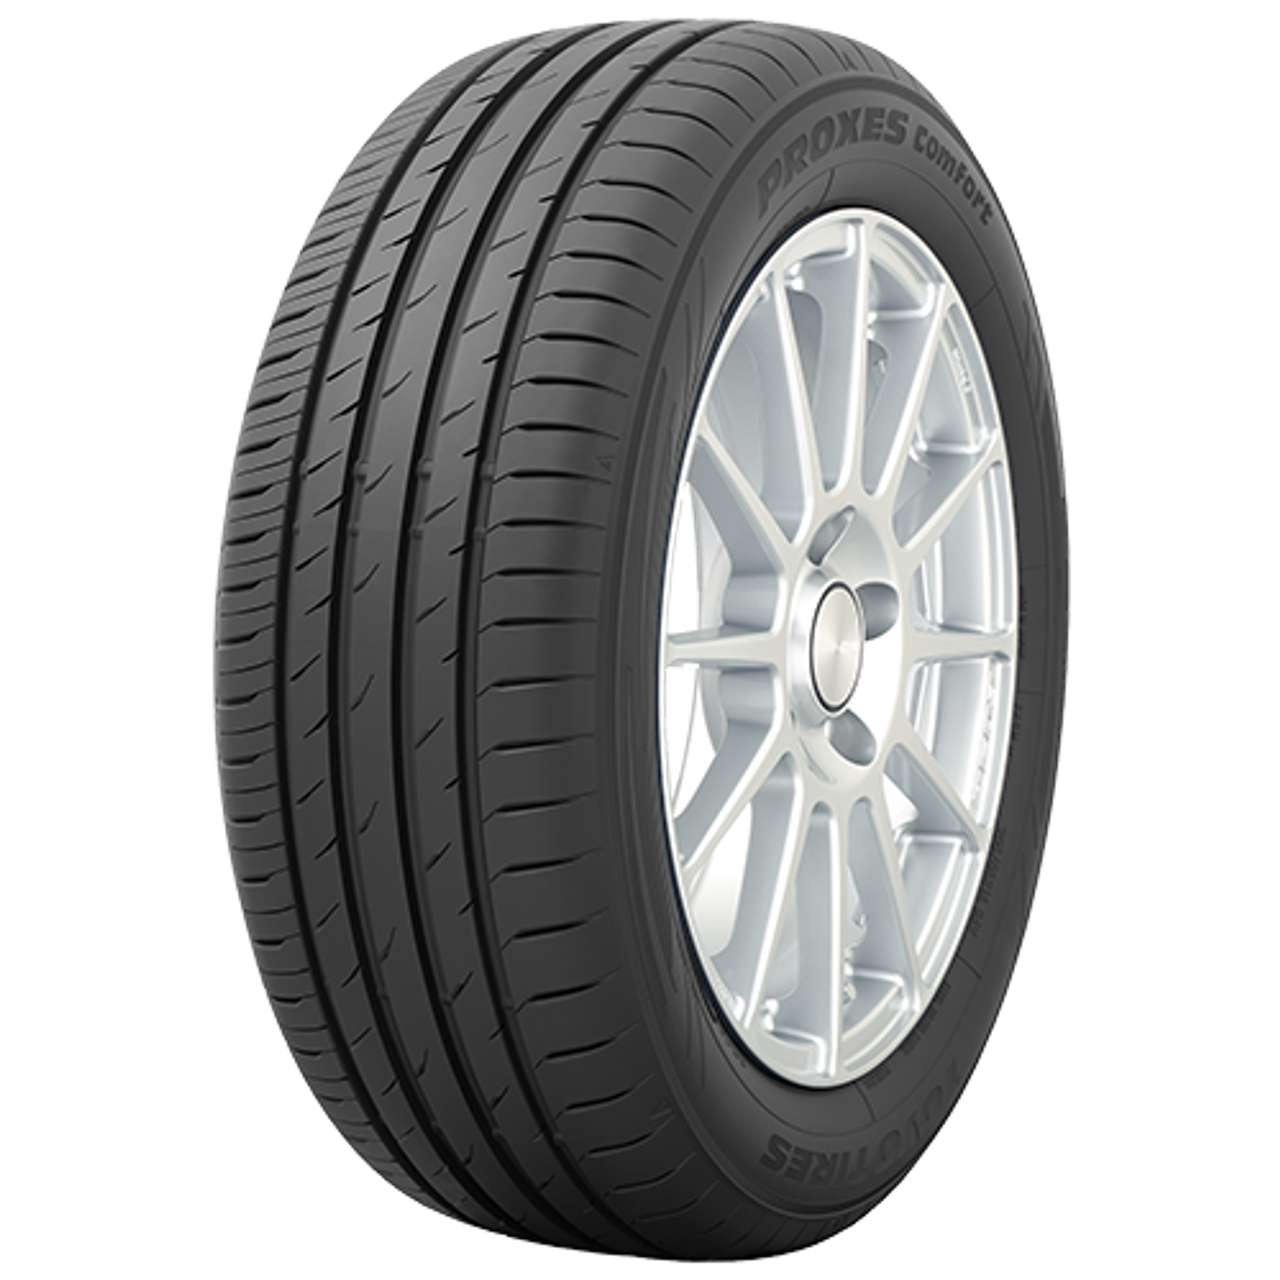 TOYO PROXES COMFORT SUV 225/60R18 104W BSW